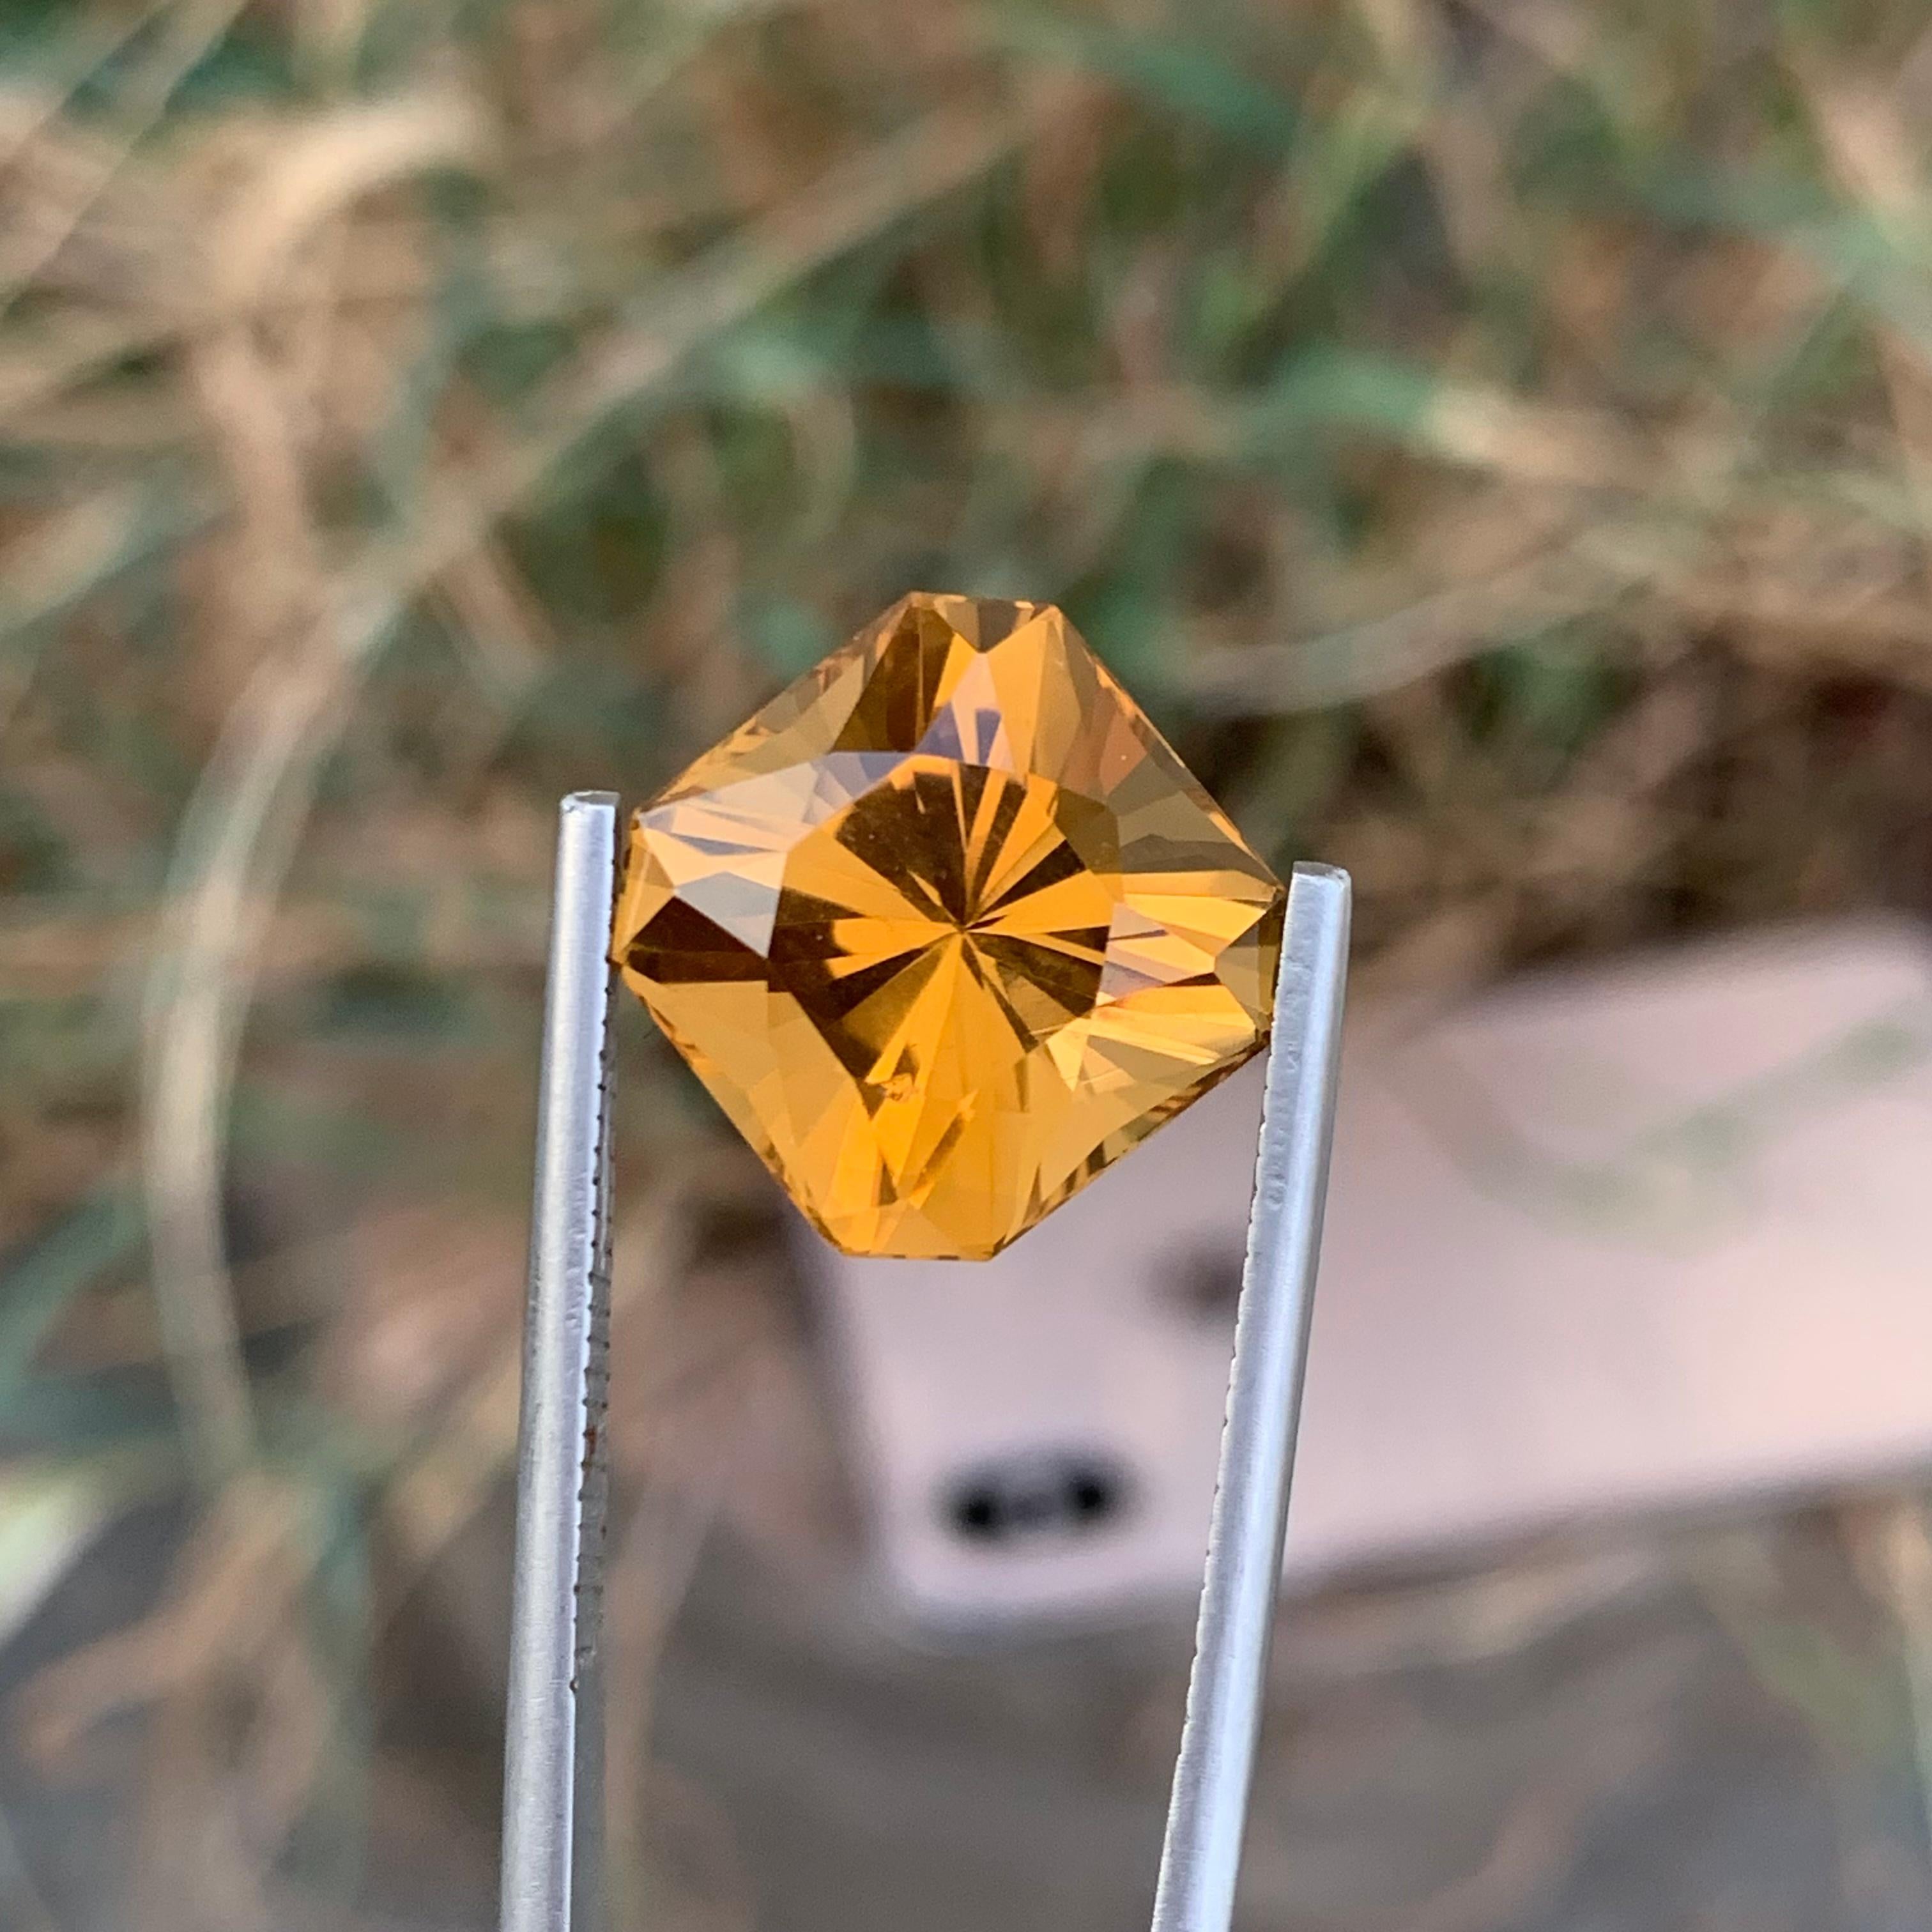 10.60 Carats Natural Loose Fancy Cut Citrine Gemstone From Brazil Mine For Sale 4